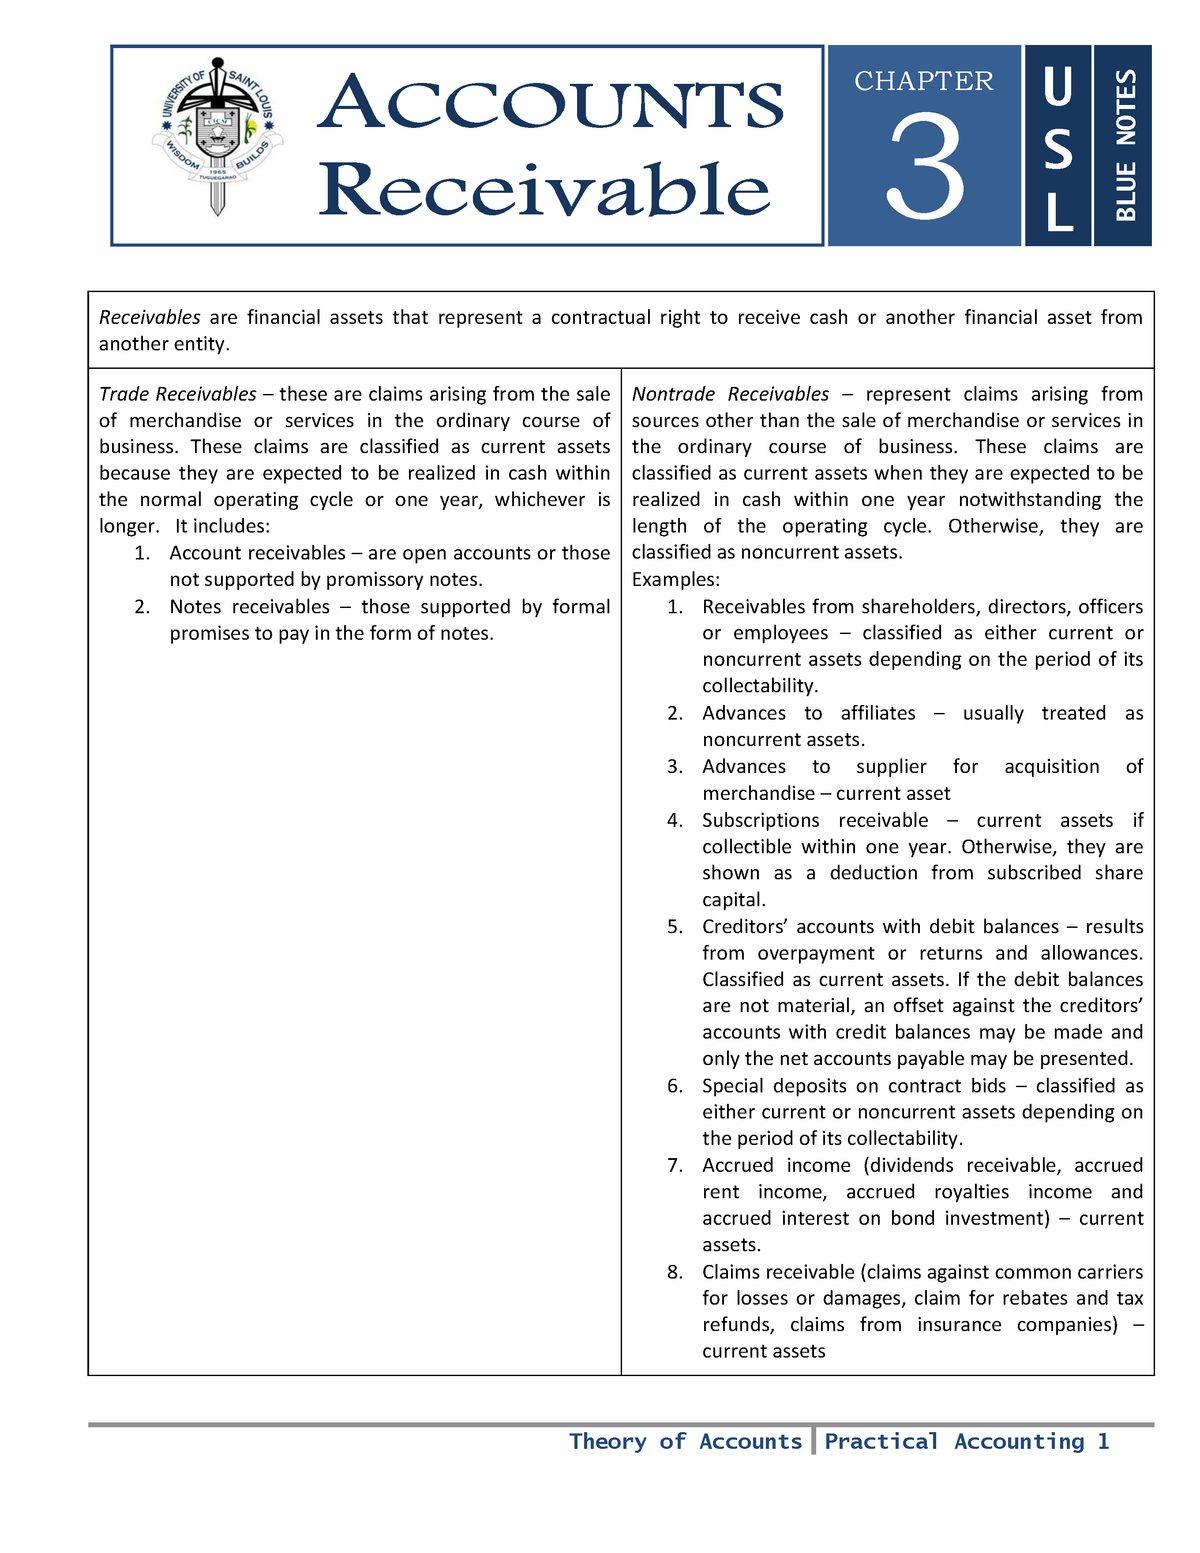 trade notes and accounts receivable